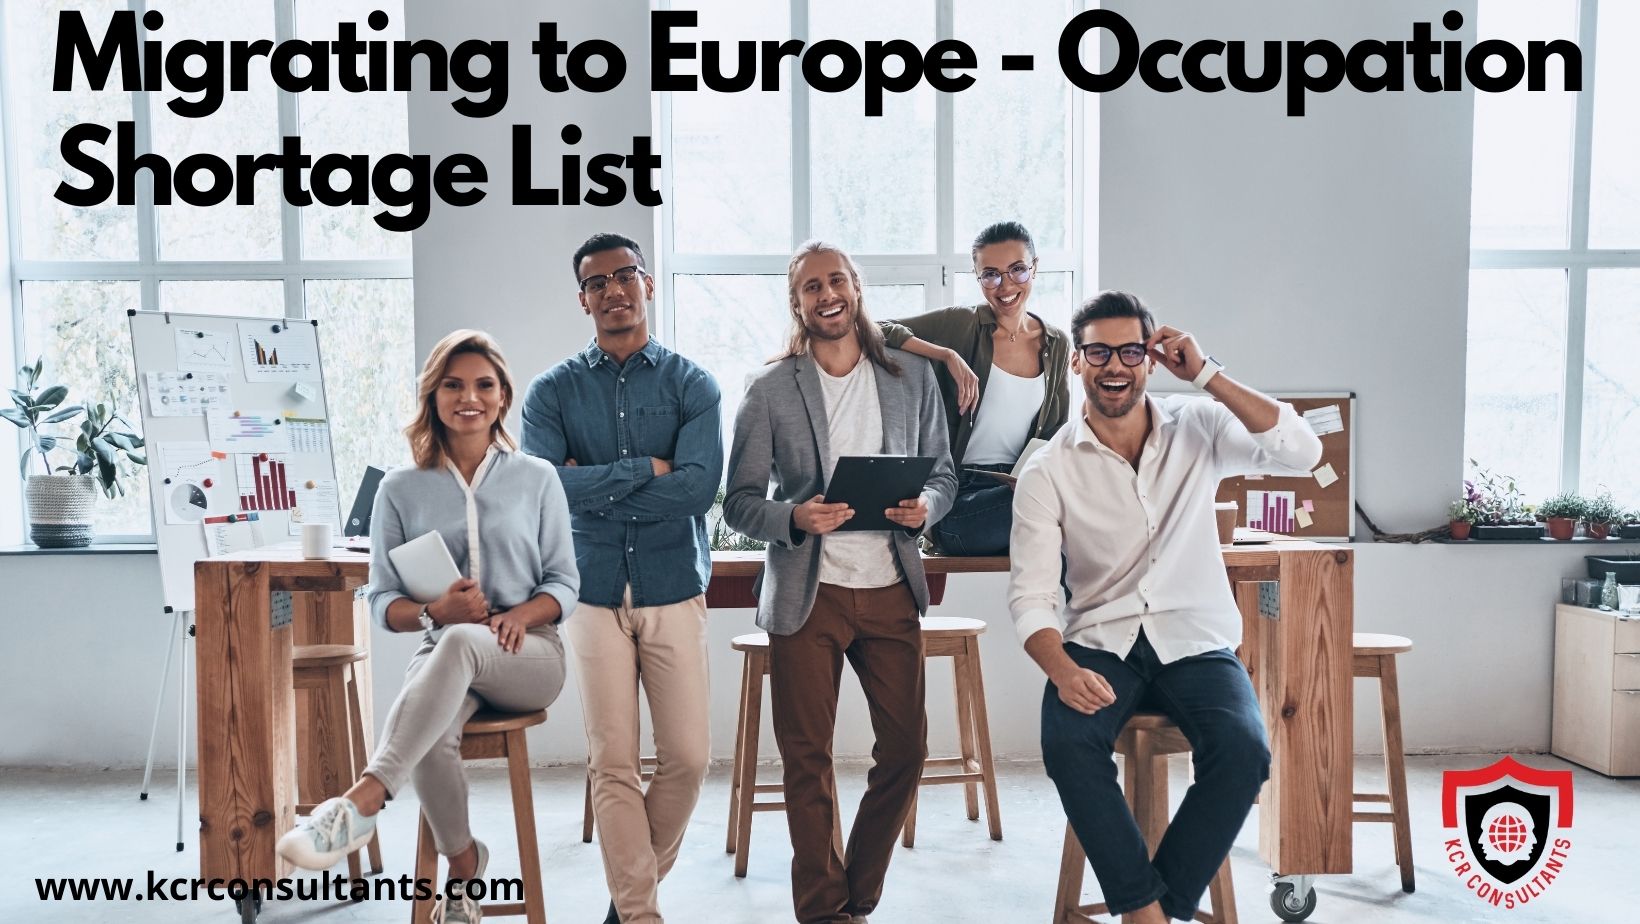 Migrating to Europe - Occupation Shortage List-KCR CONSULTANTS